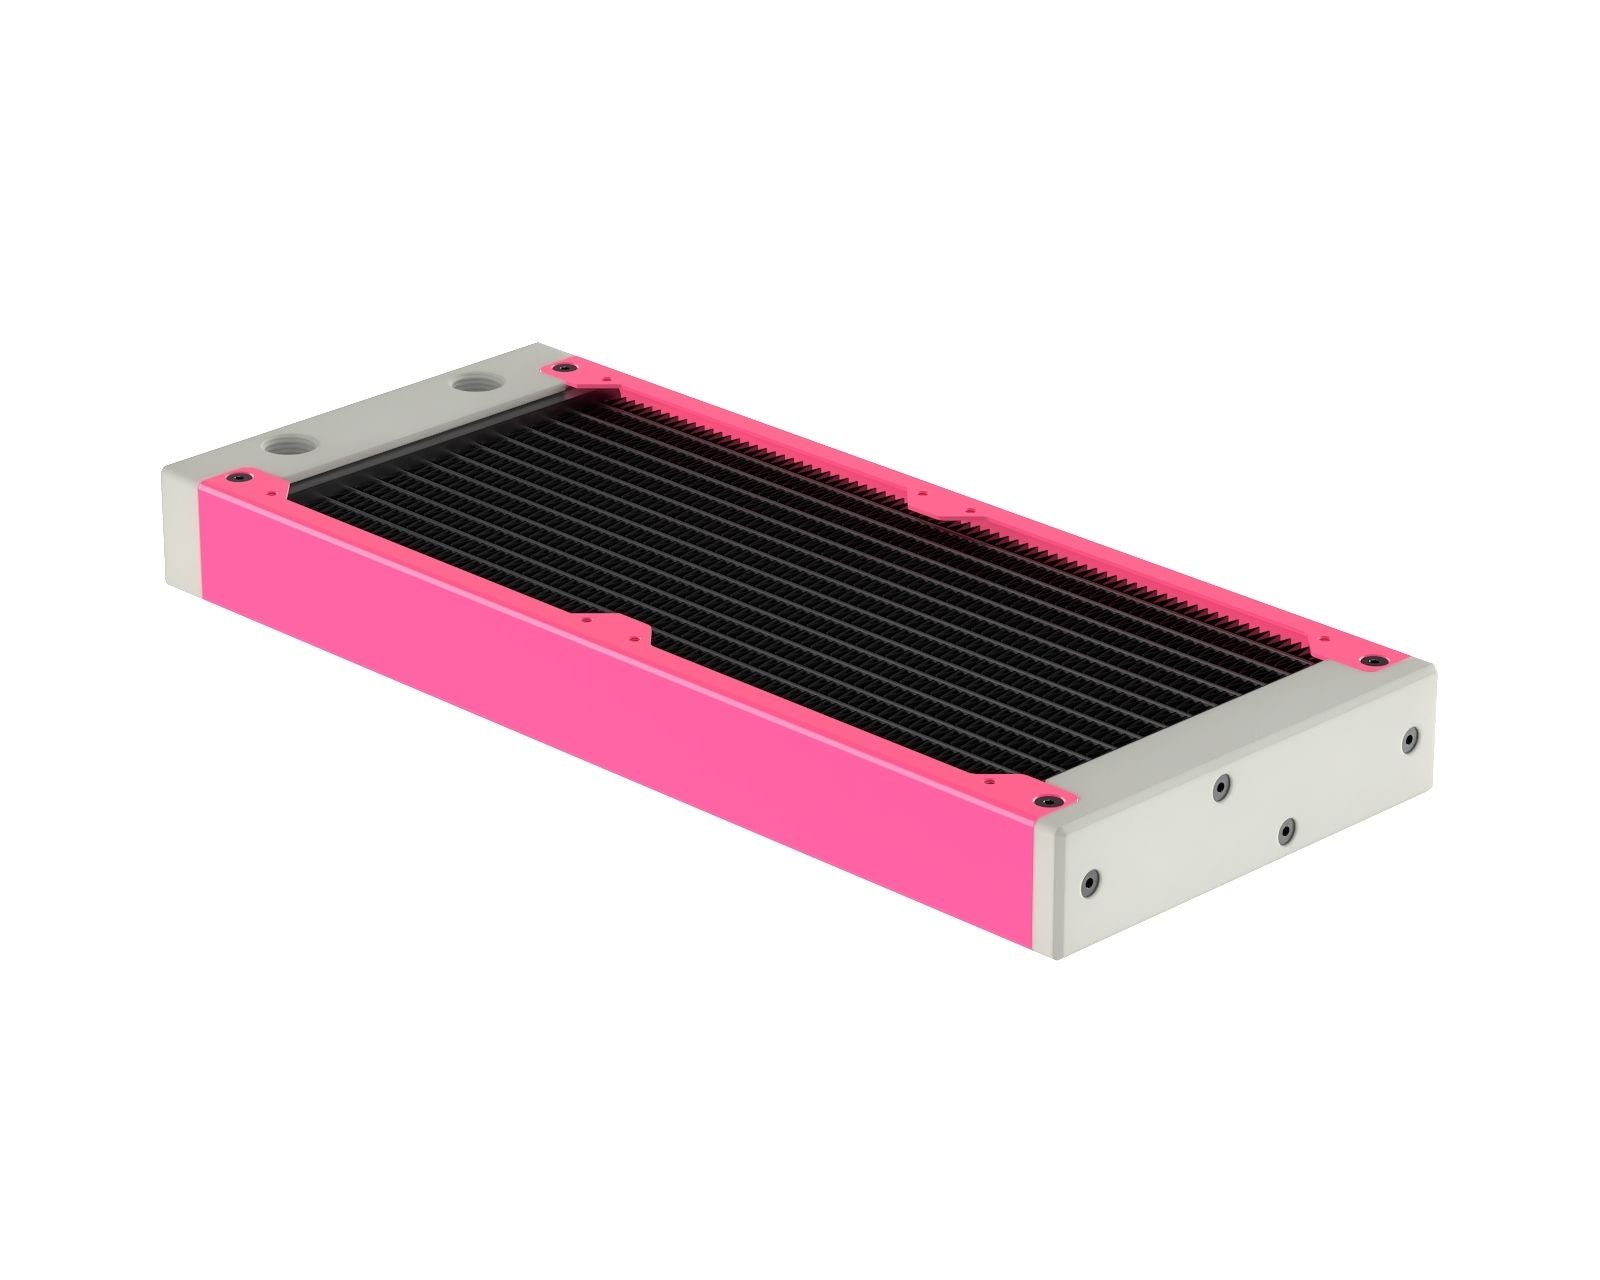 PrimoChill 240SL (30mm) EXIMO Modular Radiator, White POM, 2x120mm, Dual Fan (R-SL-W24) Available in 20+ Colors, Assembled in USA and Custom Watercooling Loop Ready - UV Pink